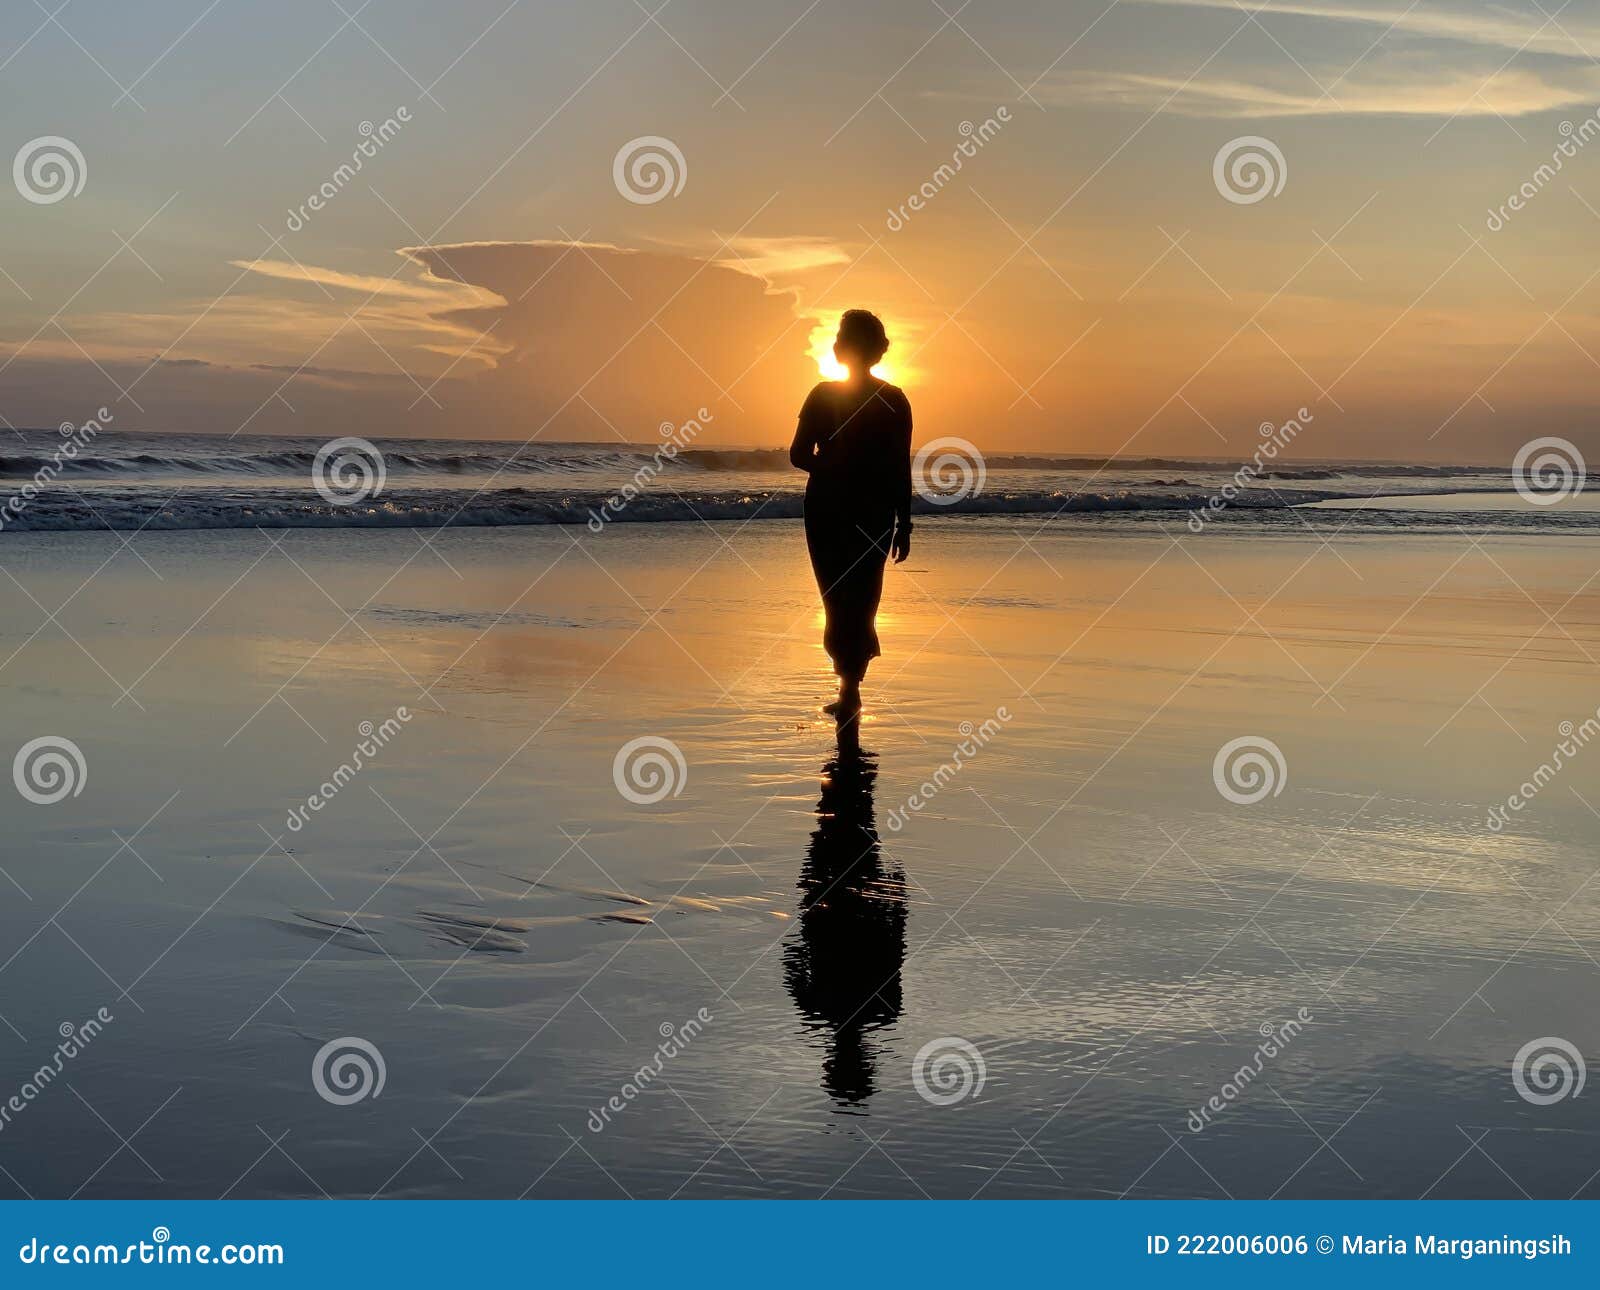 silhouette of the person walking alone in the beach at sunset. fragility and loneliness concept.